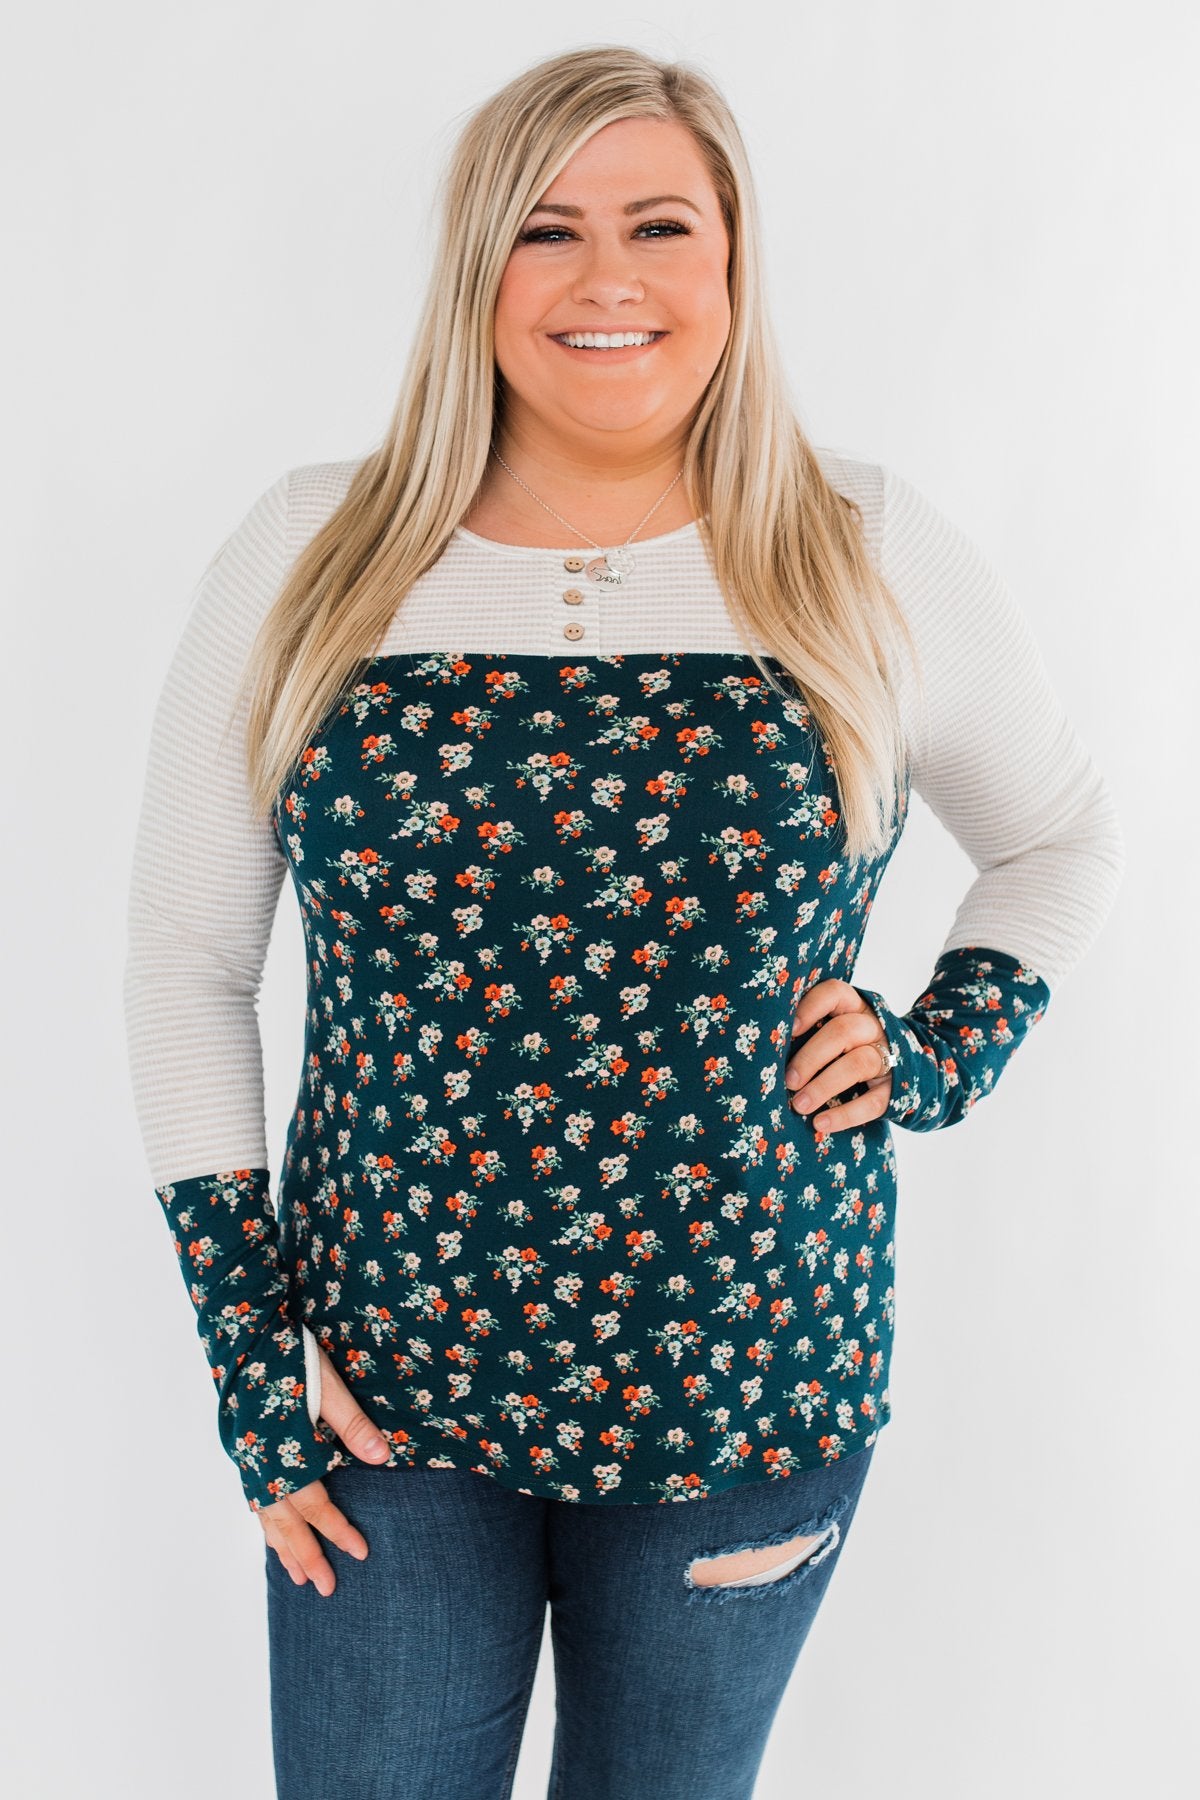 Time Of Your Life Floral & Striped Top- Dark Teal & Oatmeal